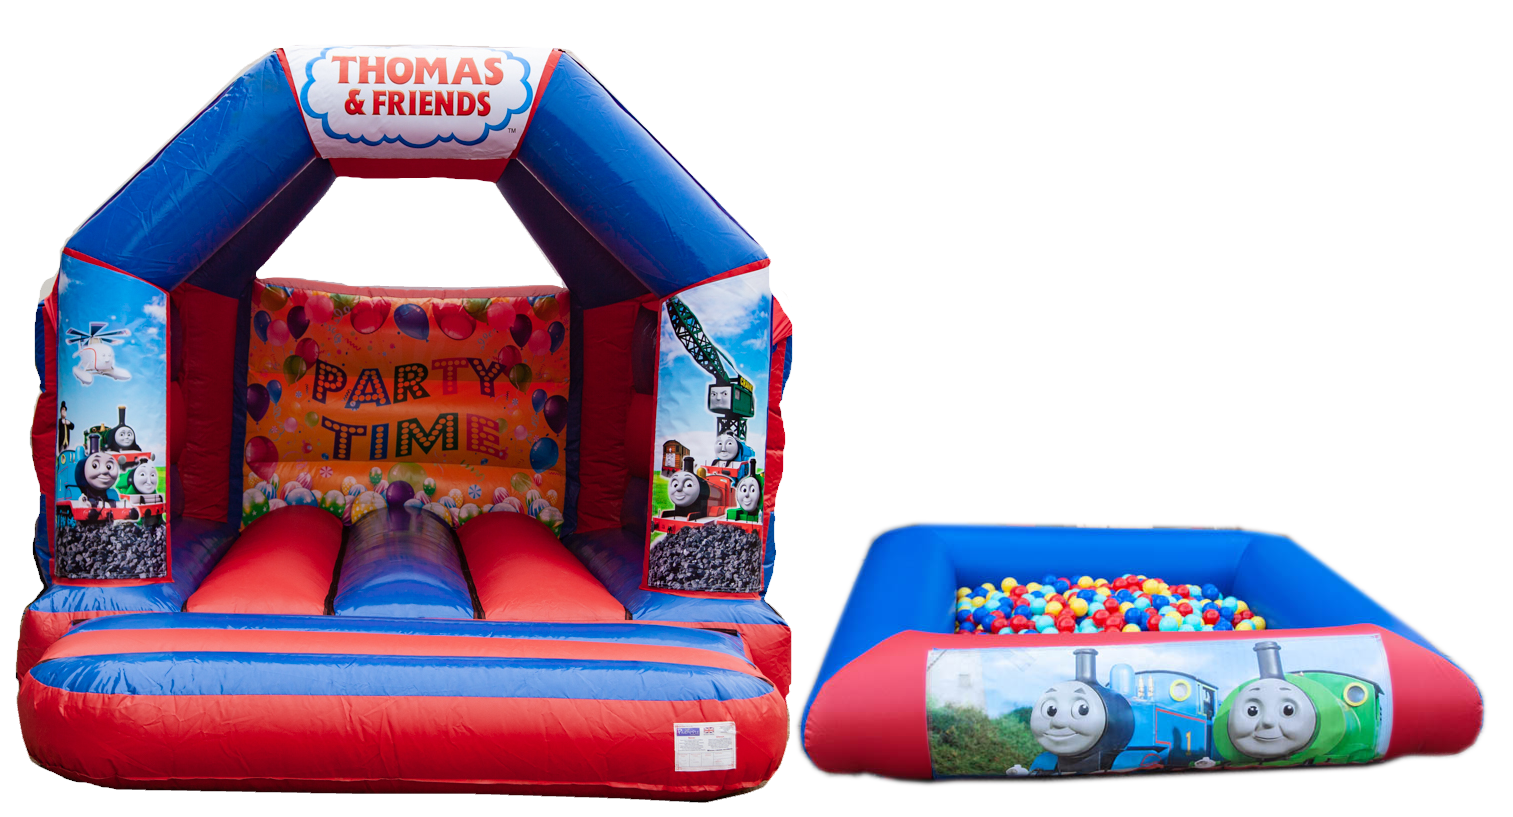 Red & Blue Bouncy castle and ballpool package for hire in Royston